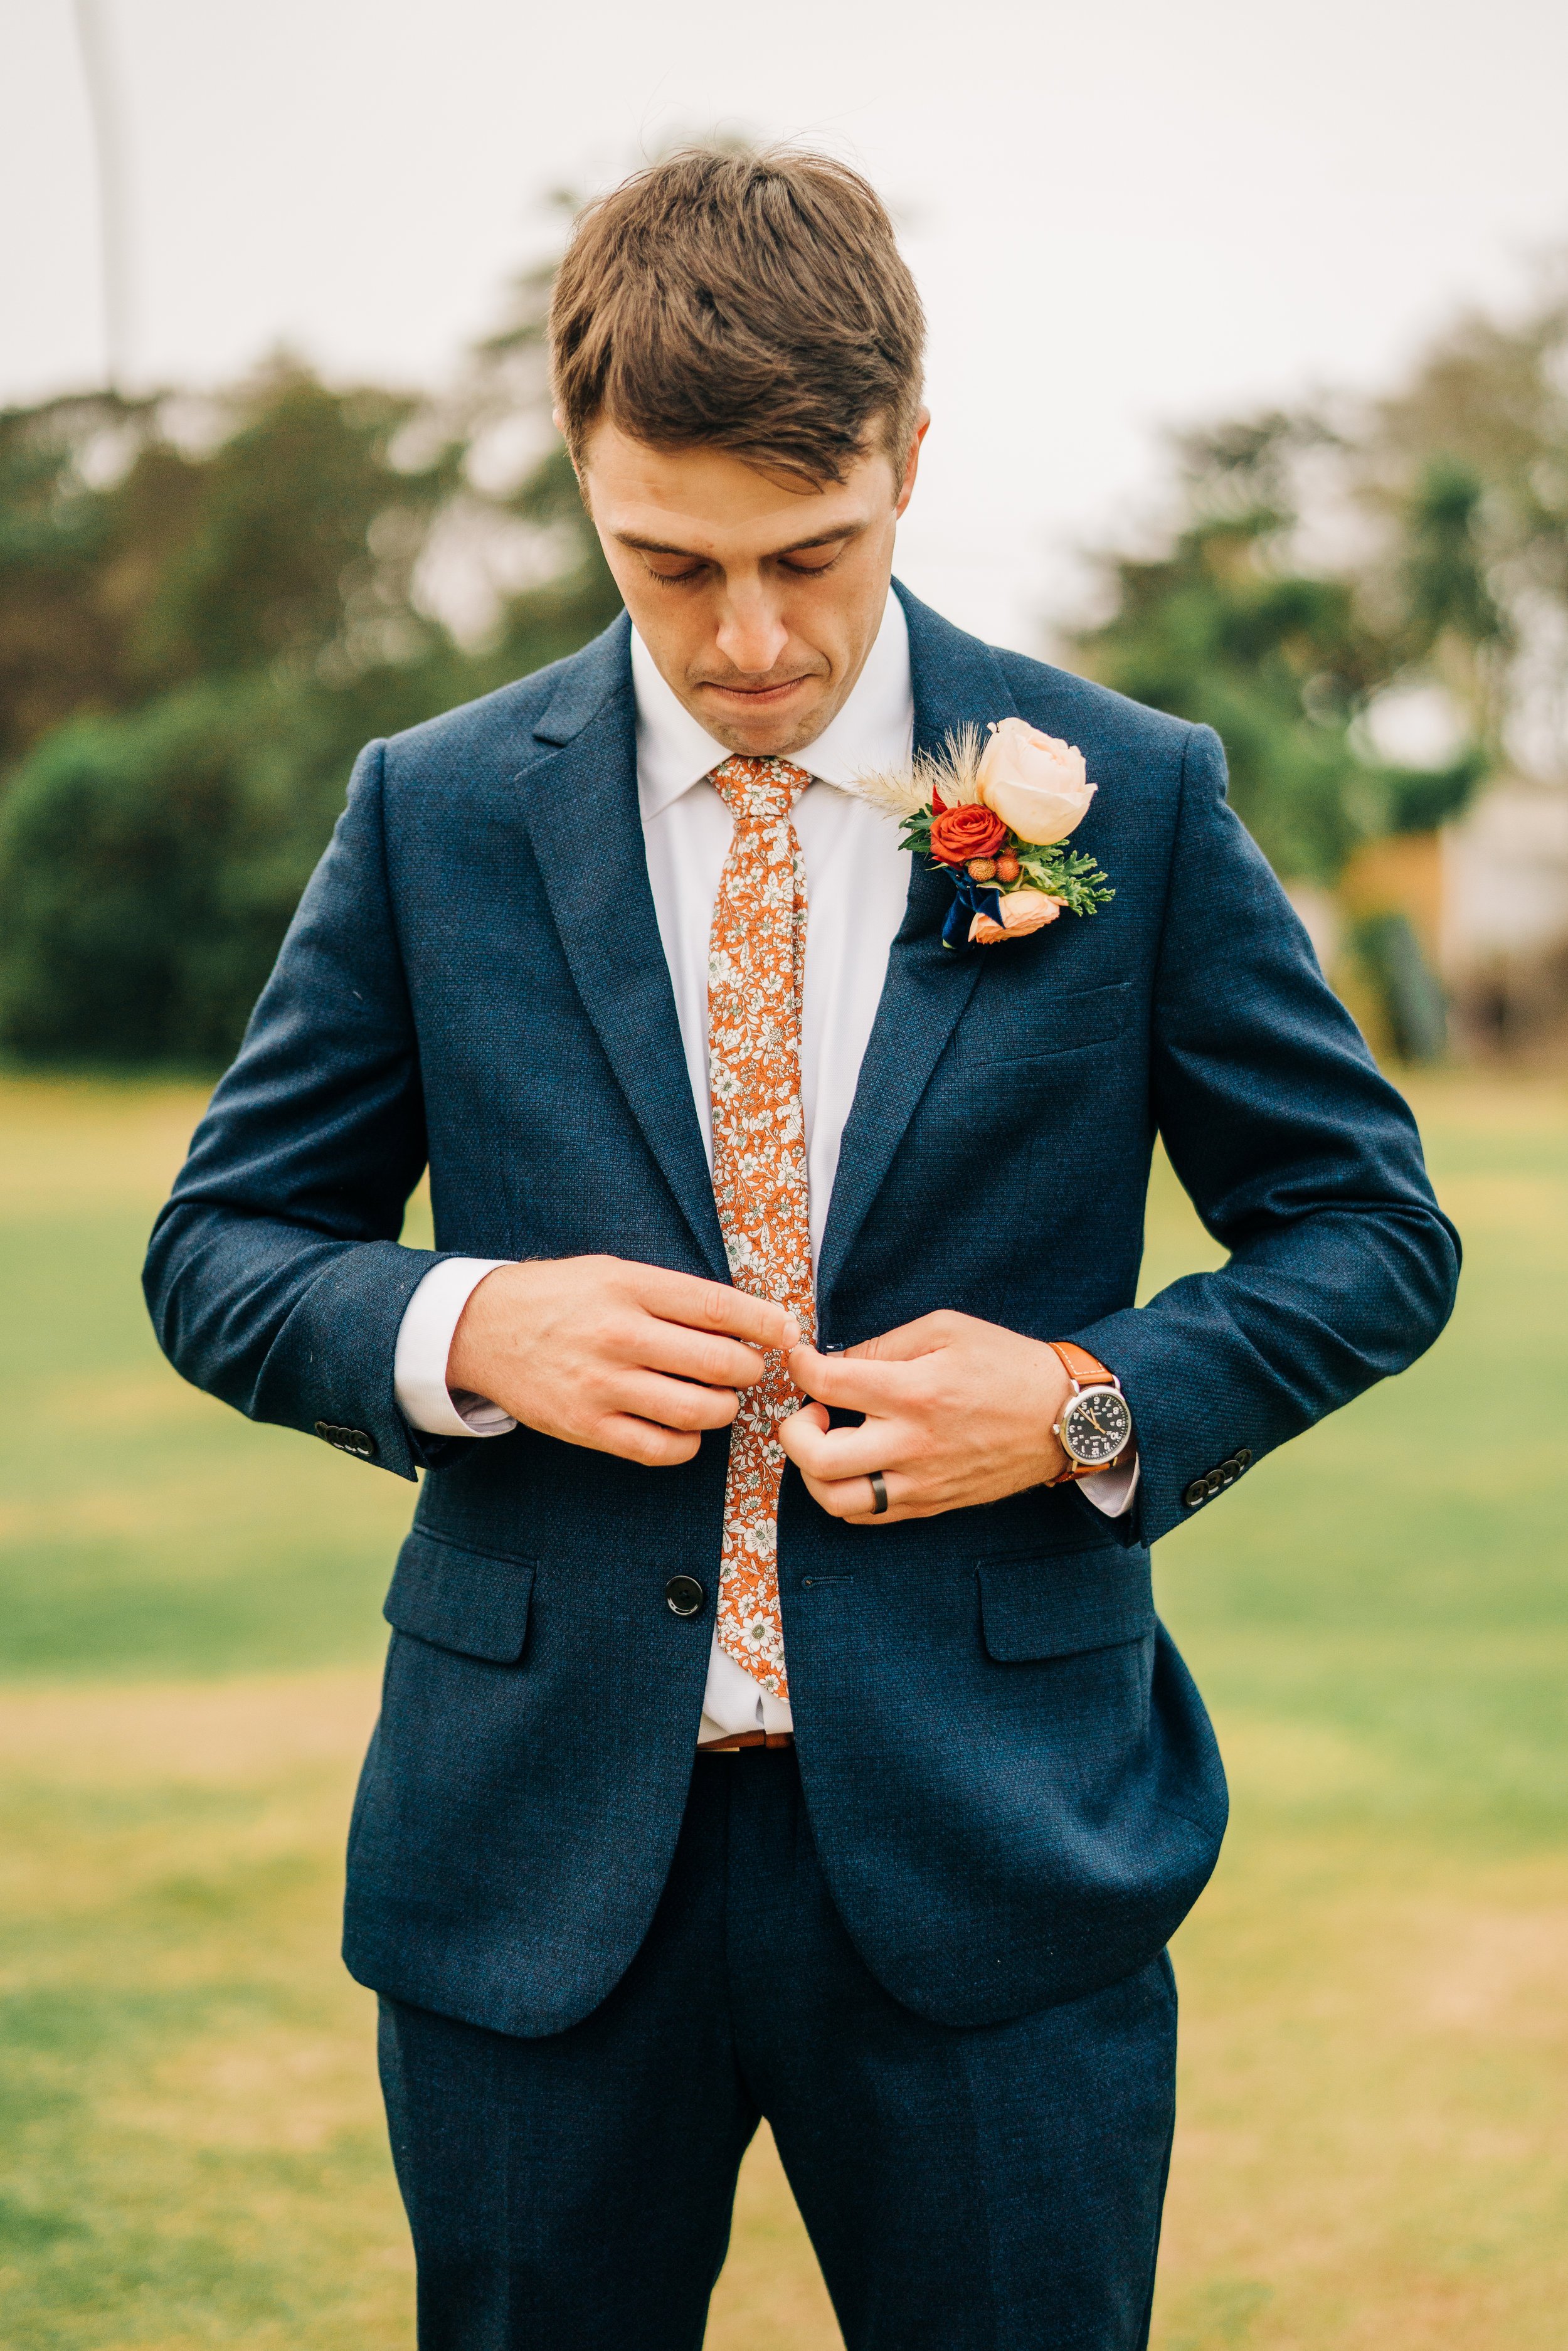 www.santabarbarawedding.com | Brandon Bibbins Photography | The Cottages at Polo Run | Christina Welch Floral | Groom Buttons Up